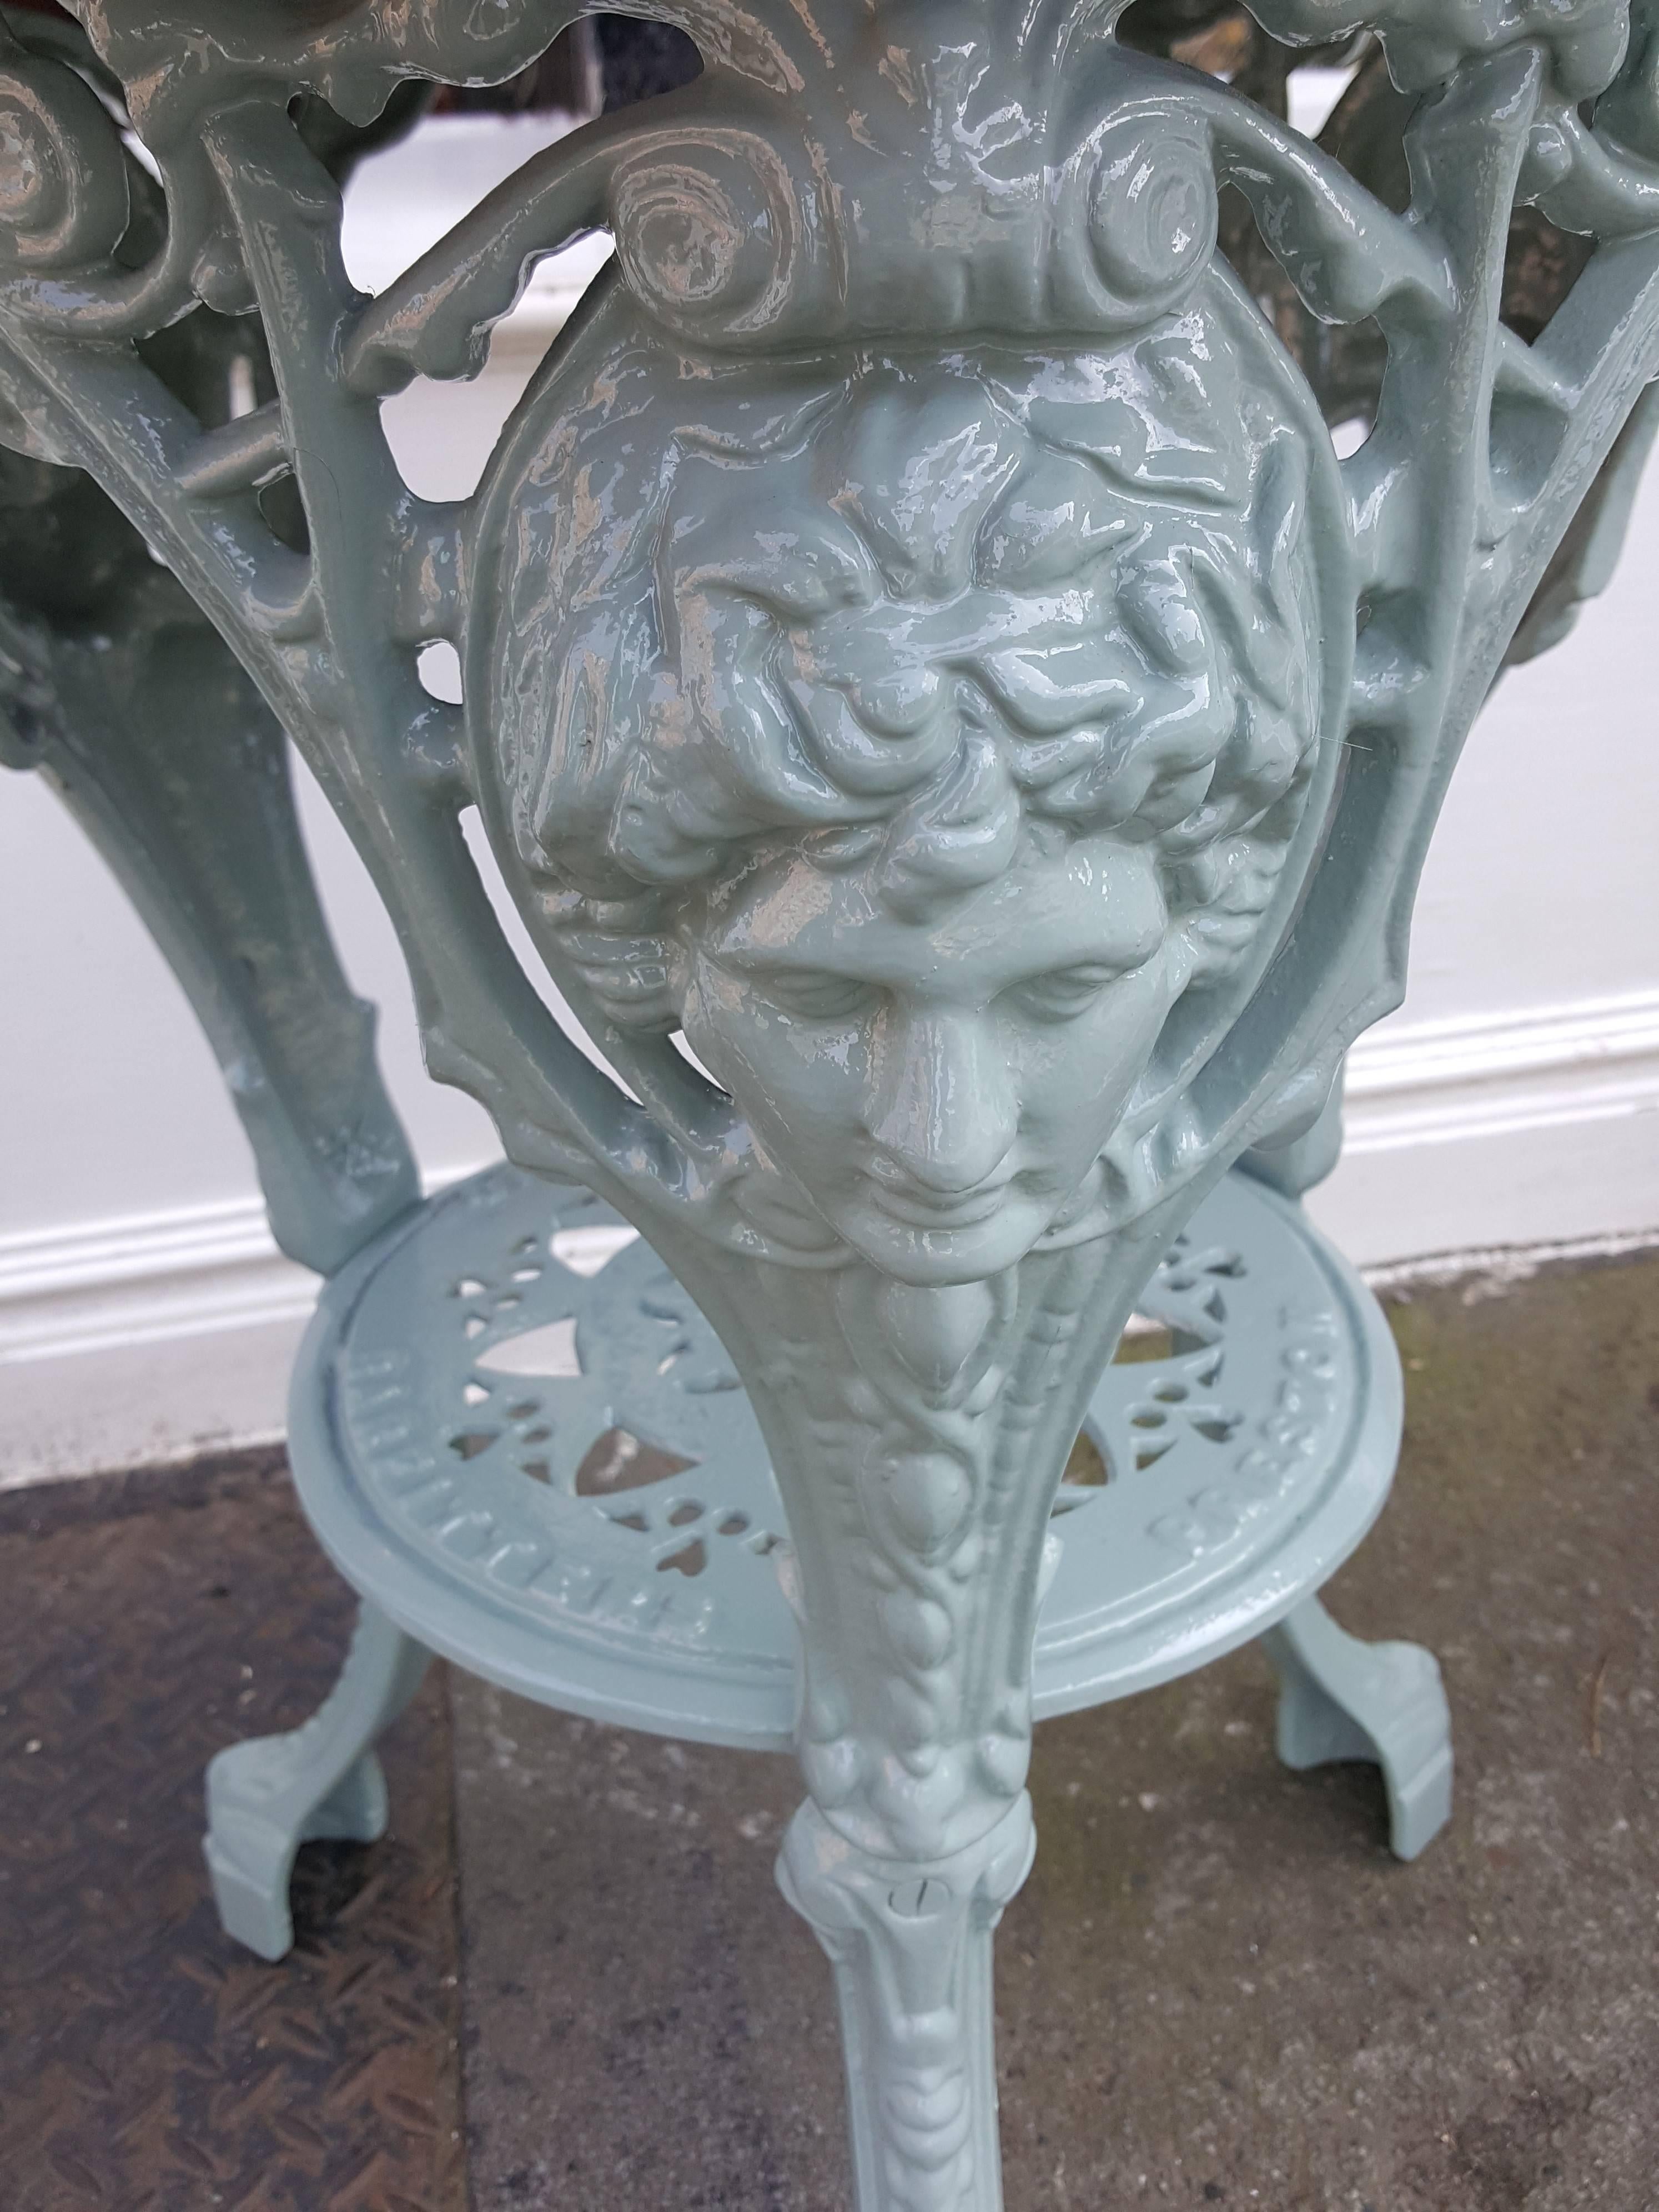 Victorian cast iron garden table with mahogany top decorated with Britannia cast portrait, hearts and lion paw feat - sold by Caskell and Chambers, Preston probably cast by Saxendale & Co Manchester.
Measures: 24